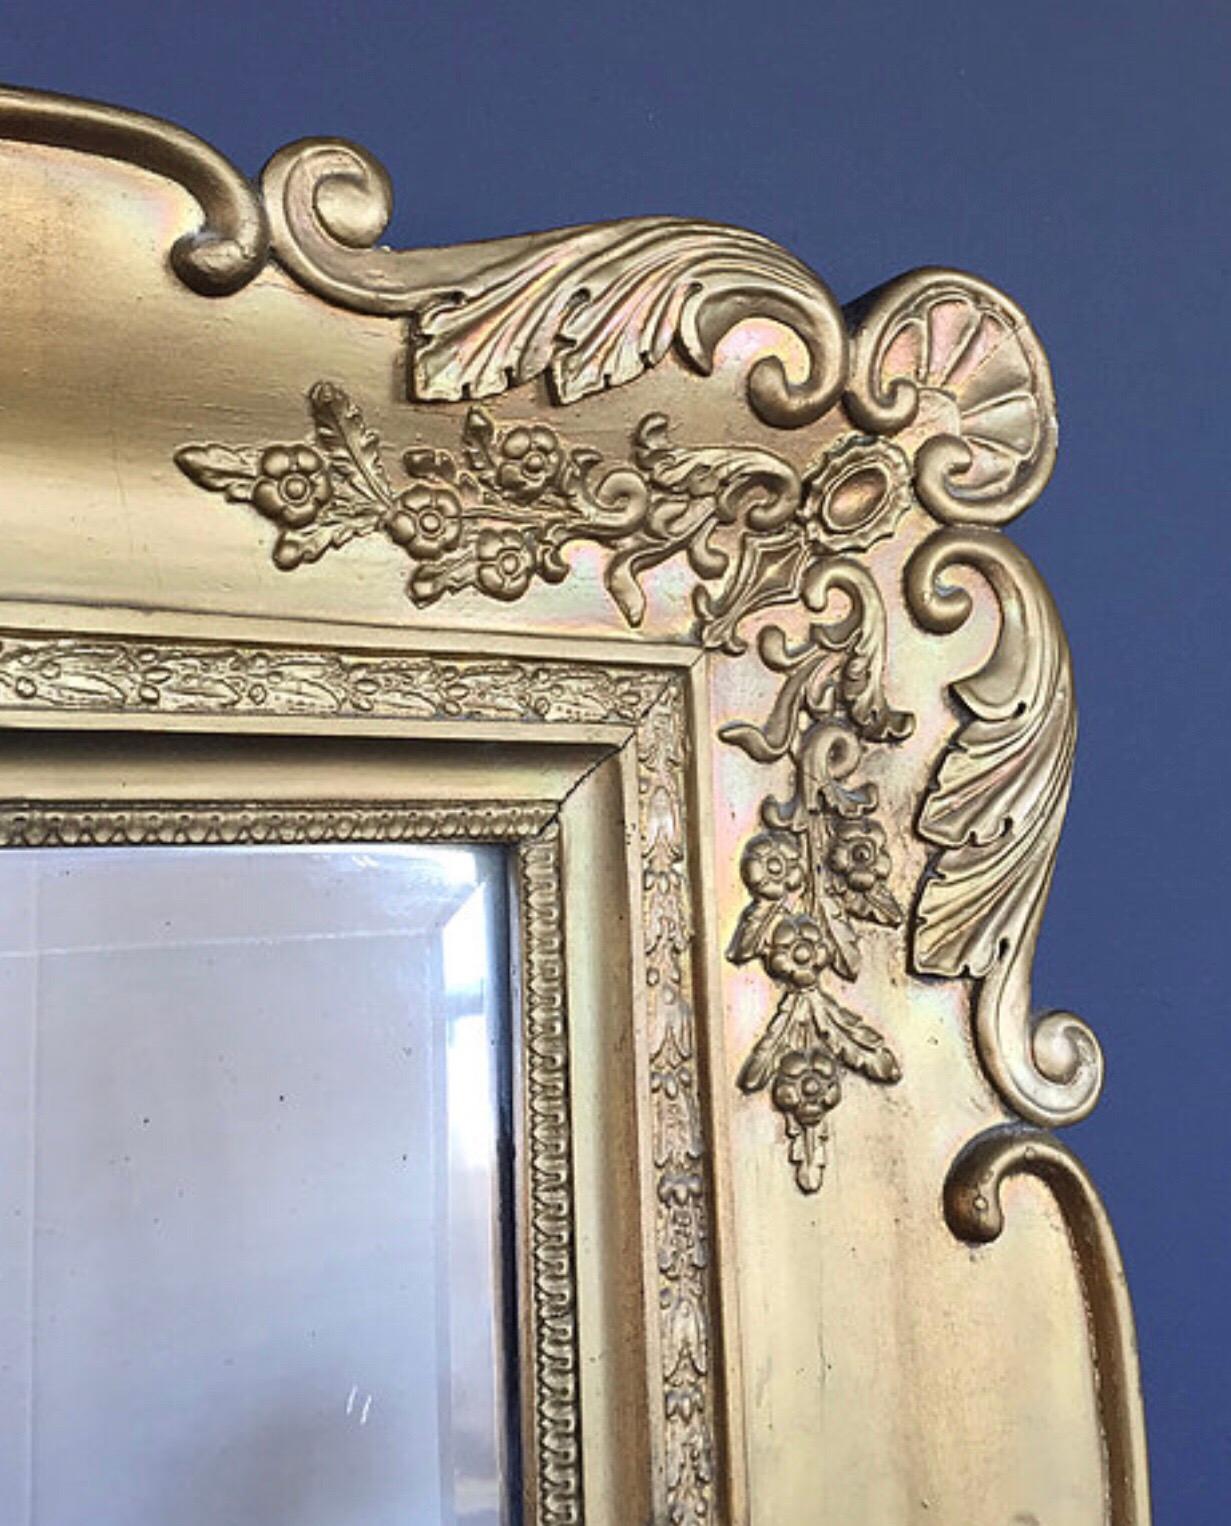 Grand antique French Baroque mirror from the early 1800s 
Beautiful hand carved frame in great condition and with lovely patina to the surface
Facet cut glass also with a lovely patina and oxidation
This stately 6’ mirror can be hung landscape or